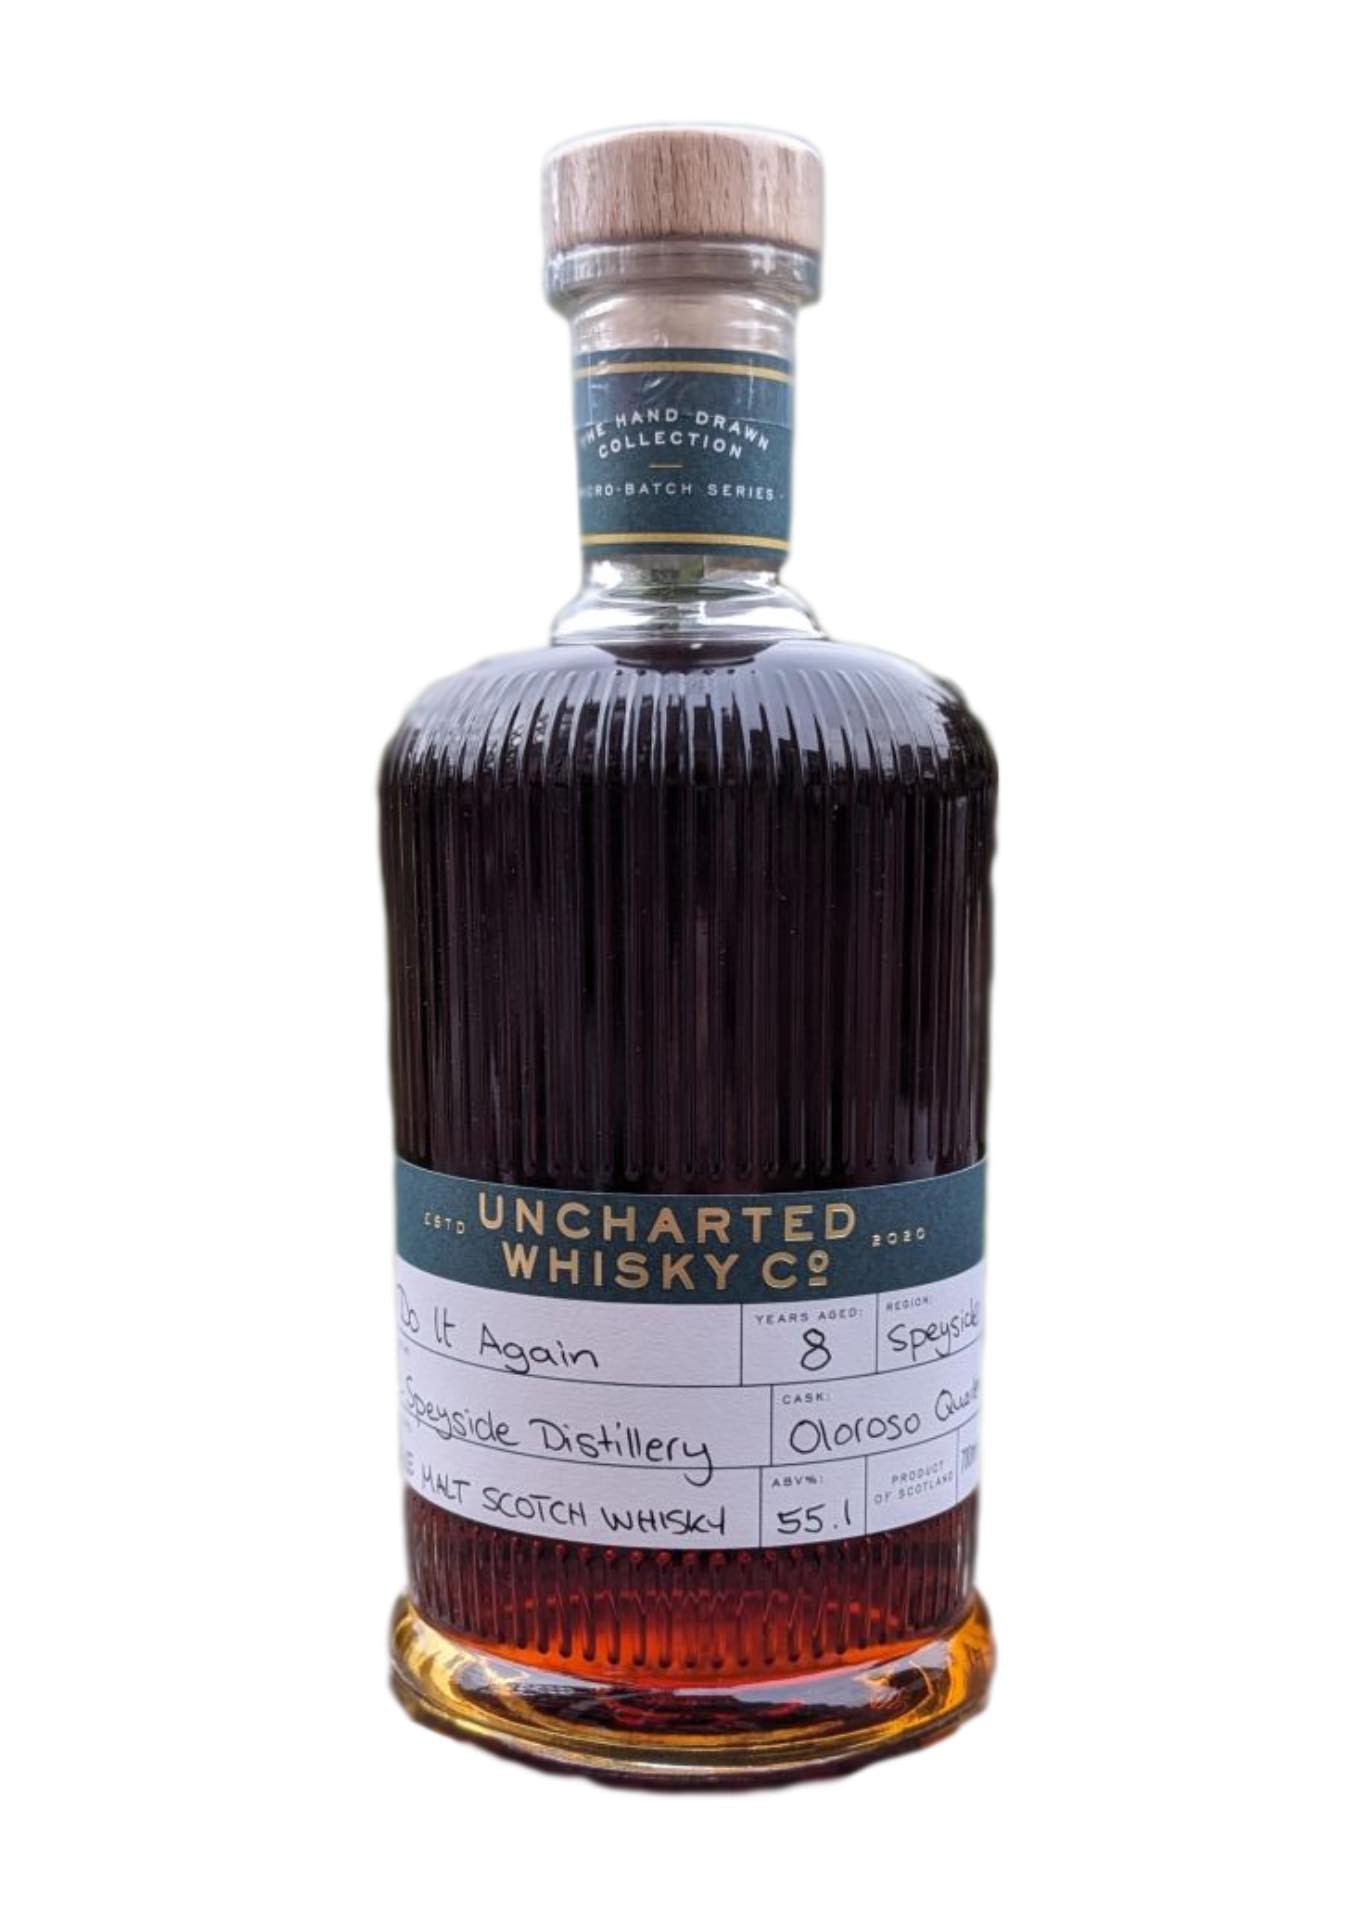 Uncharted Whisky, Do It Again, Speyside Distillery 8 Year Old